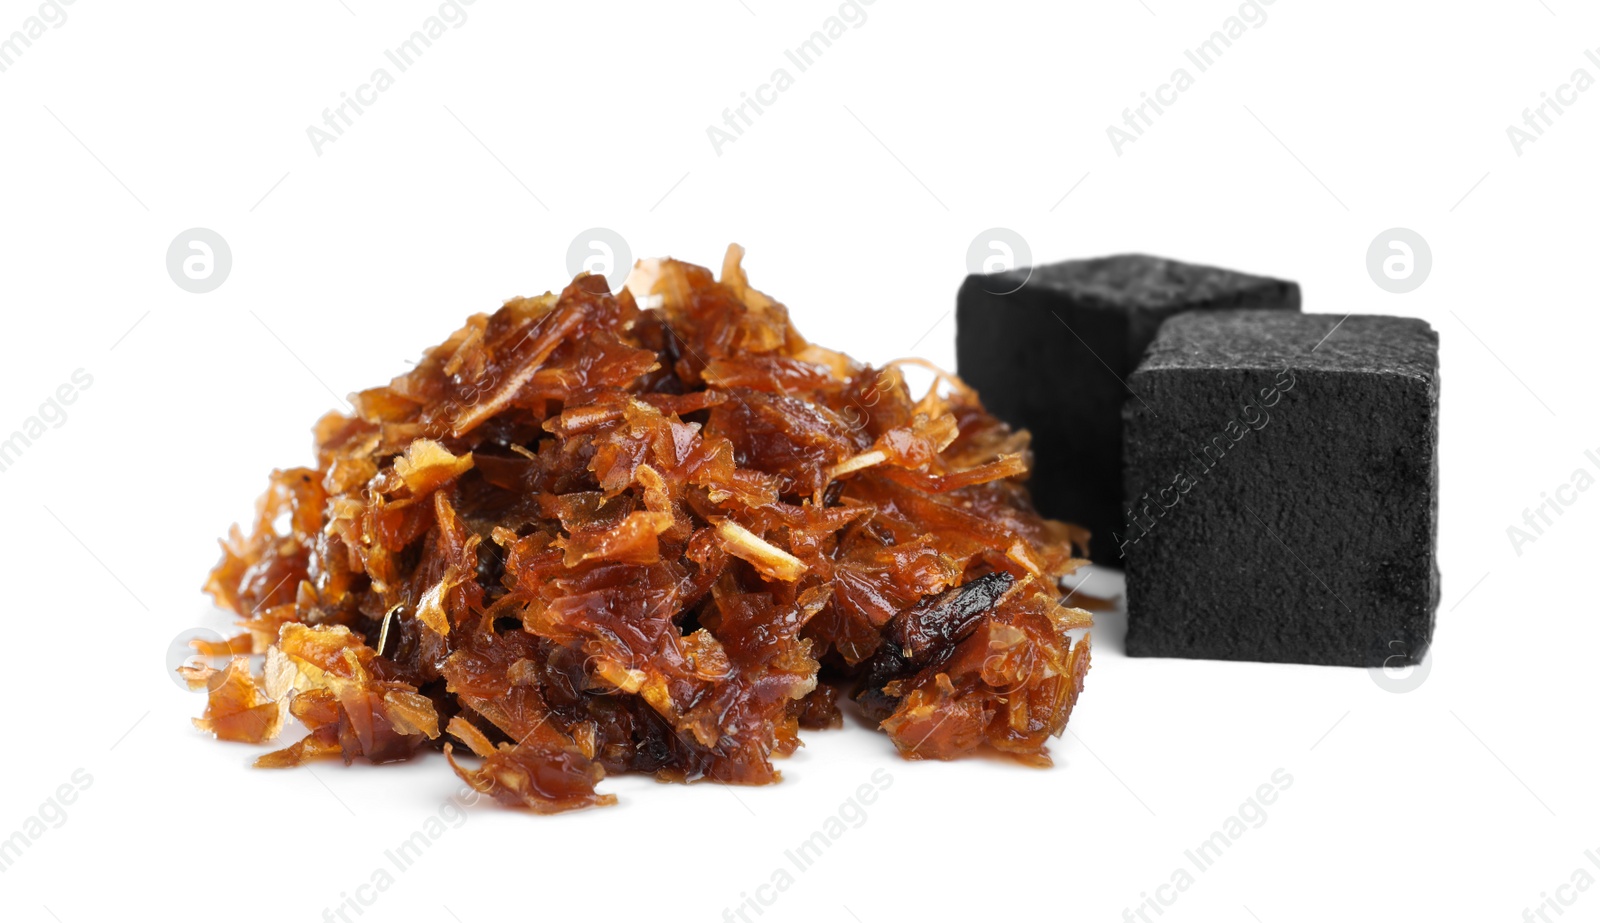 Photo of Pile of hookah tobacco and charcoal cubes on white background